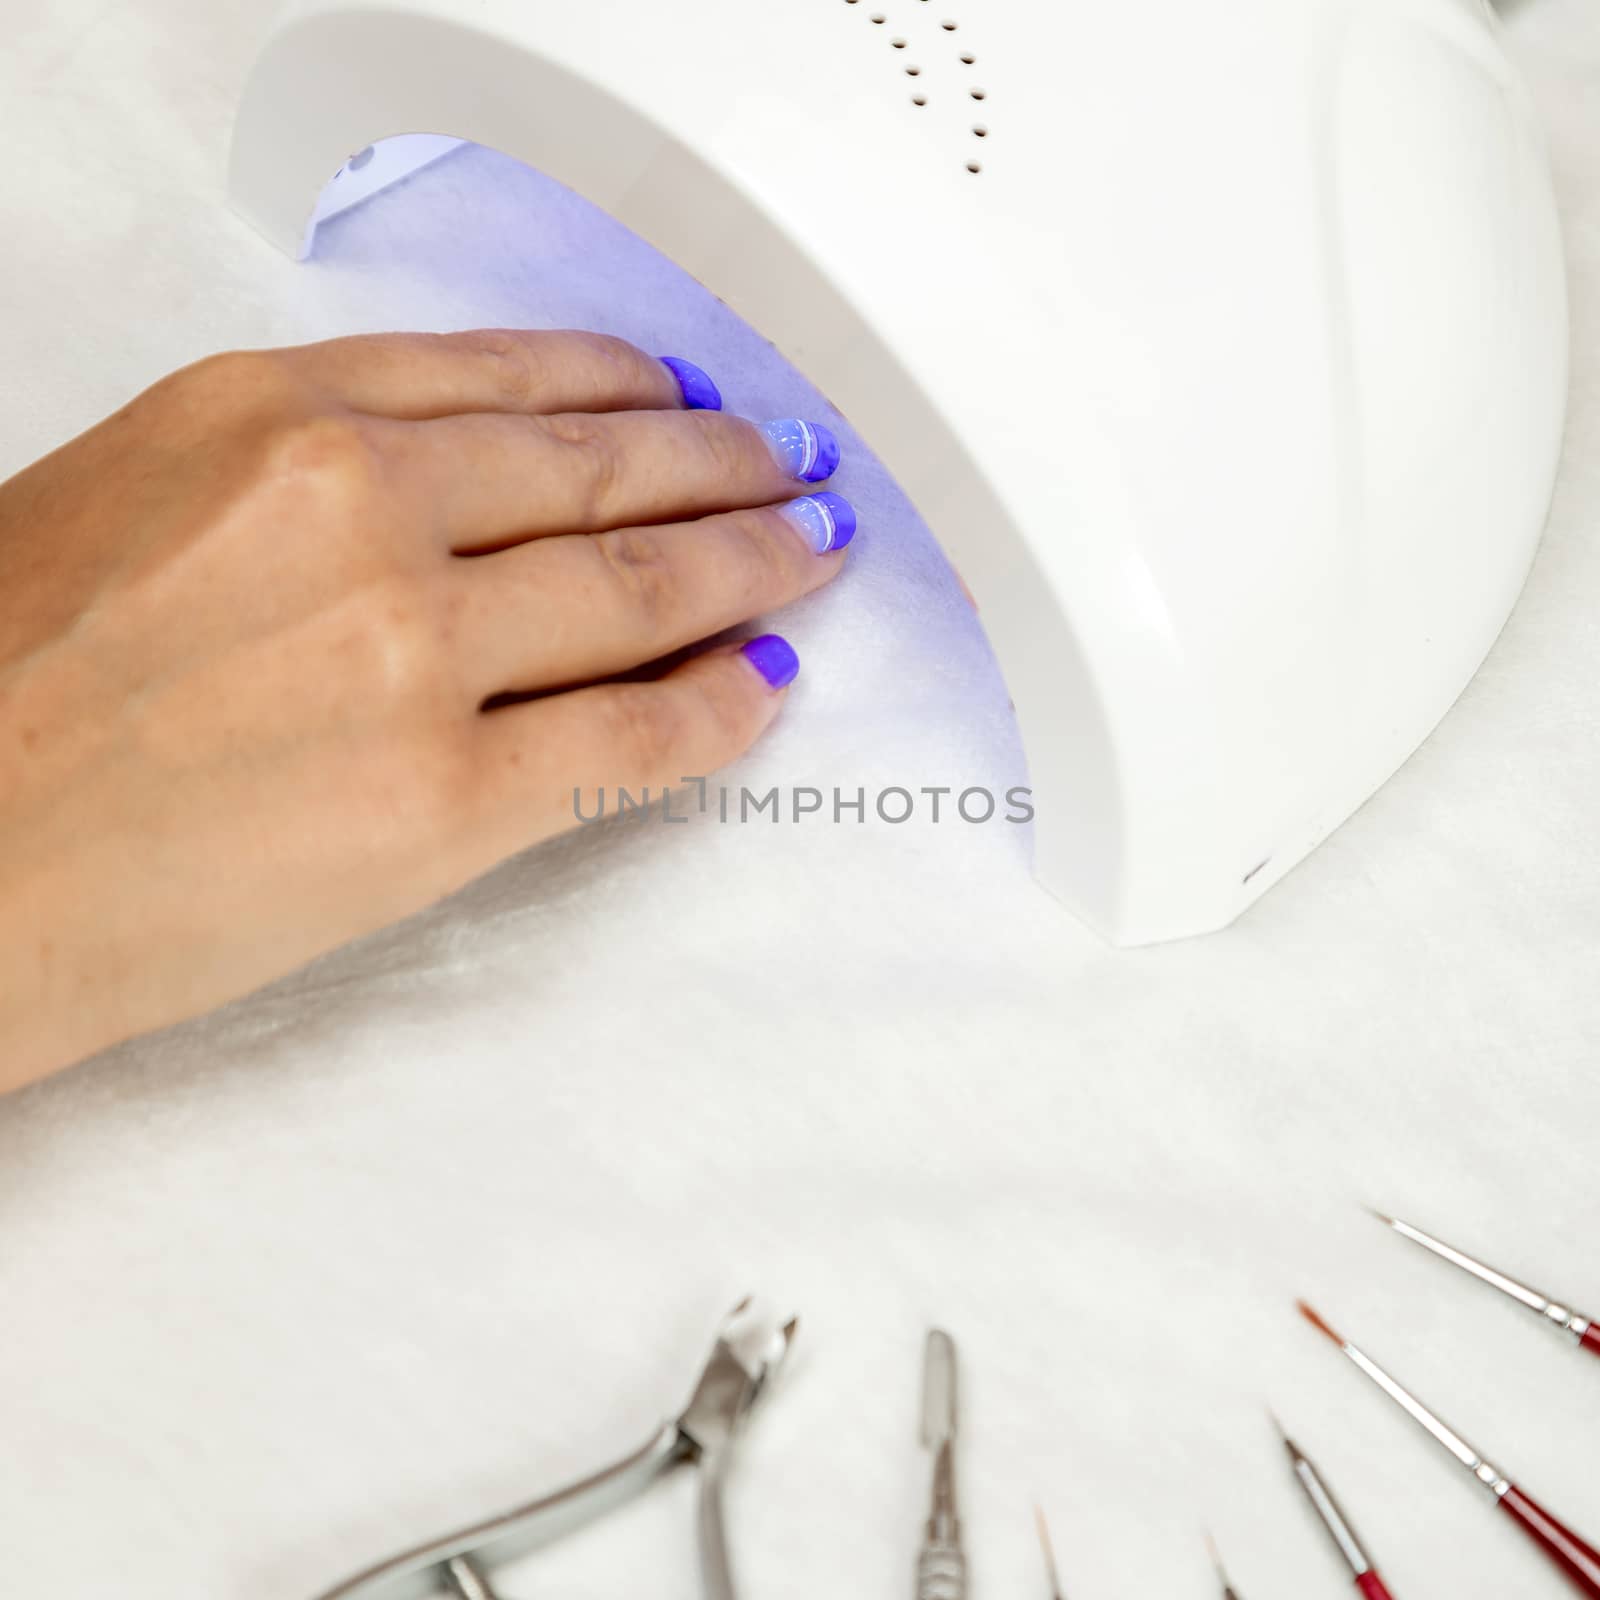 The woman 's hand lies in a UV lamp to dry the coating on the nails.